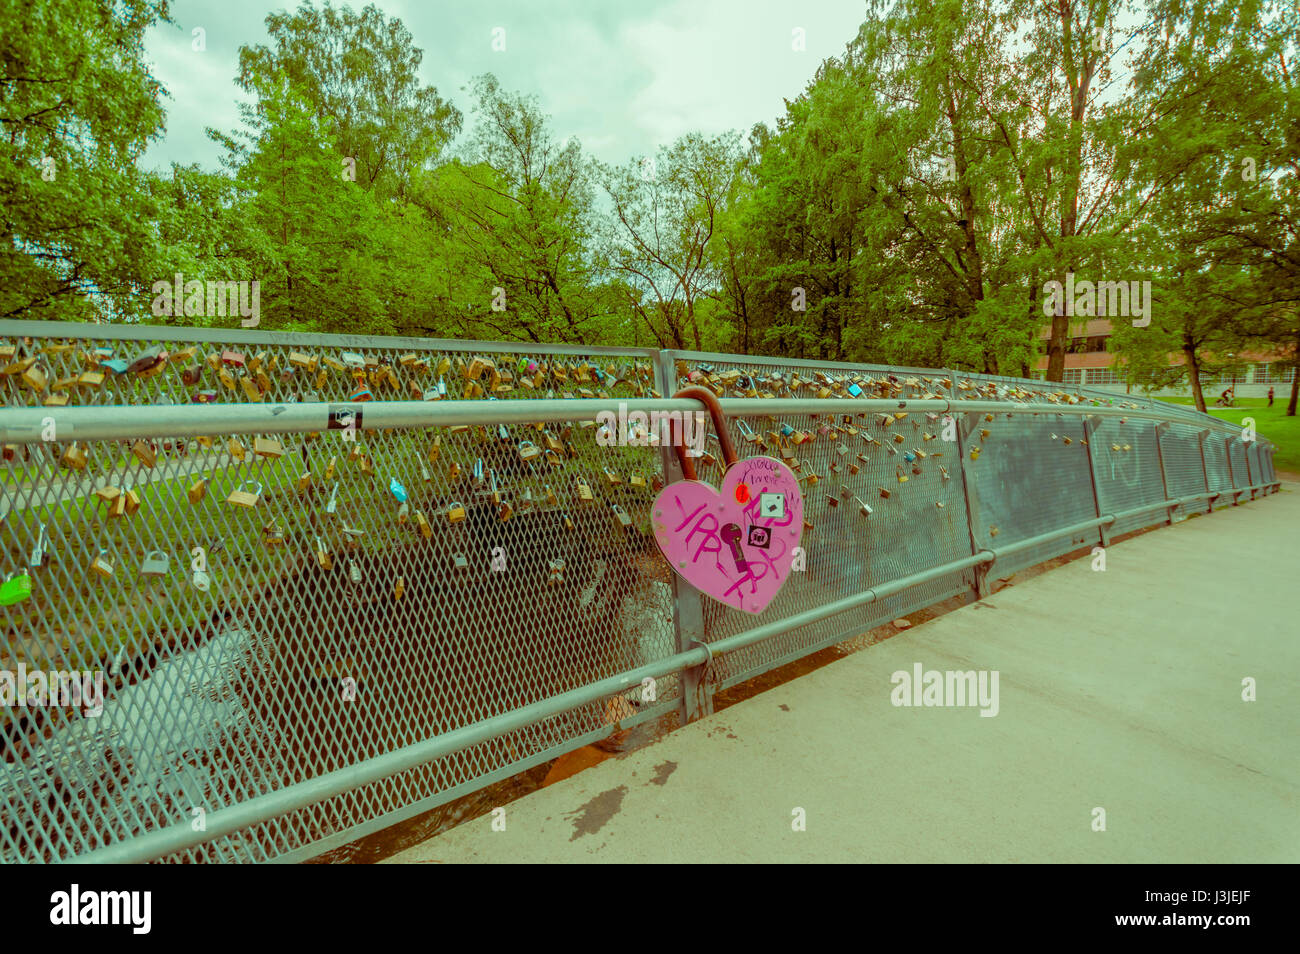 OSLO, NORWAY - 8 JULY, 2015: Alongside Akerselva river passing through city, bridge with many locks hooked as declarations for love. Stock Photo